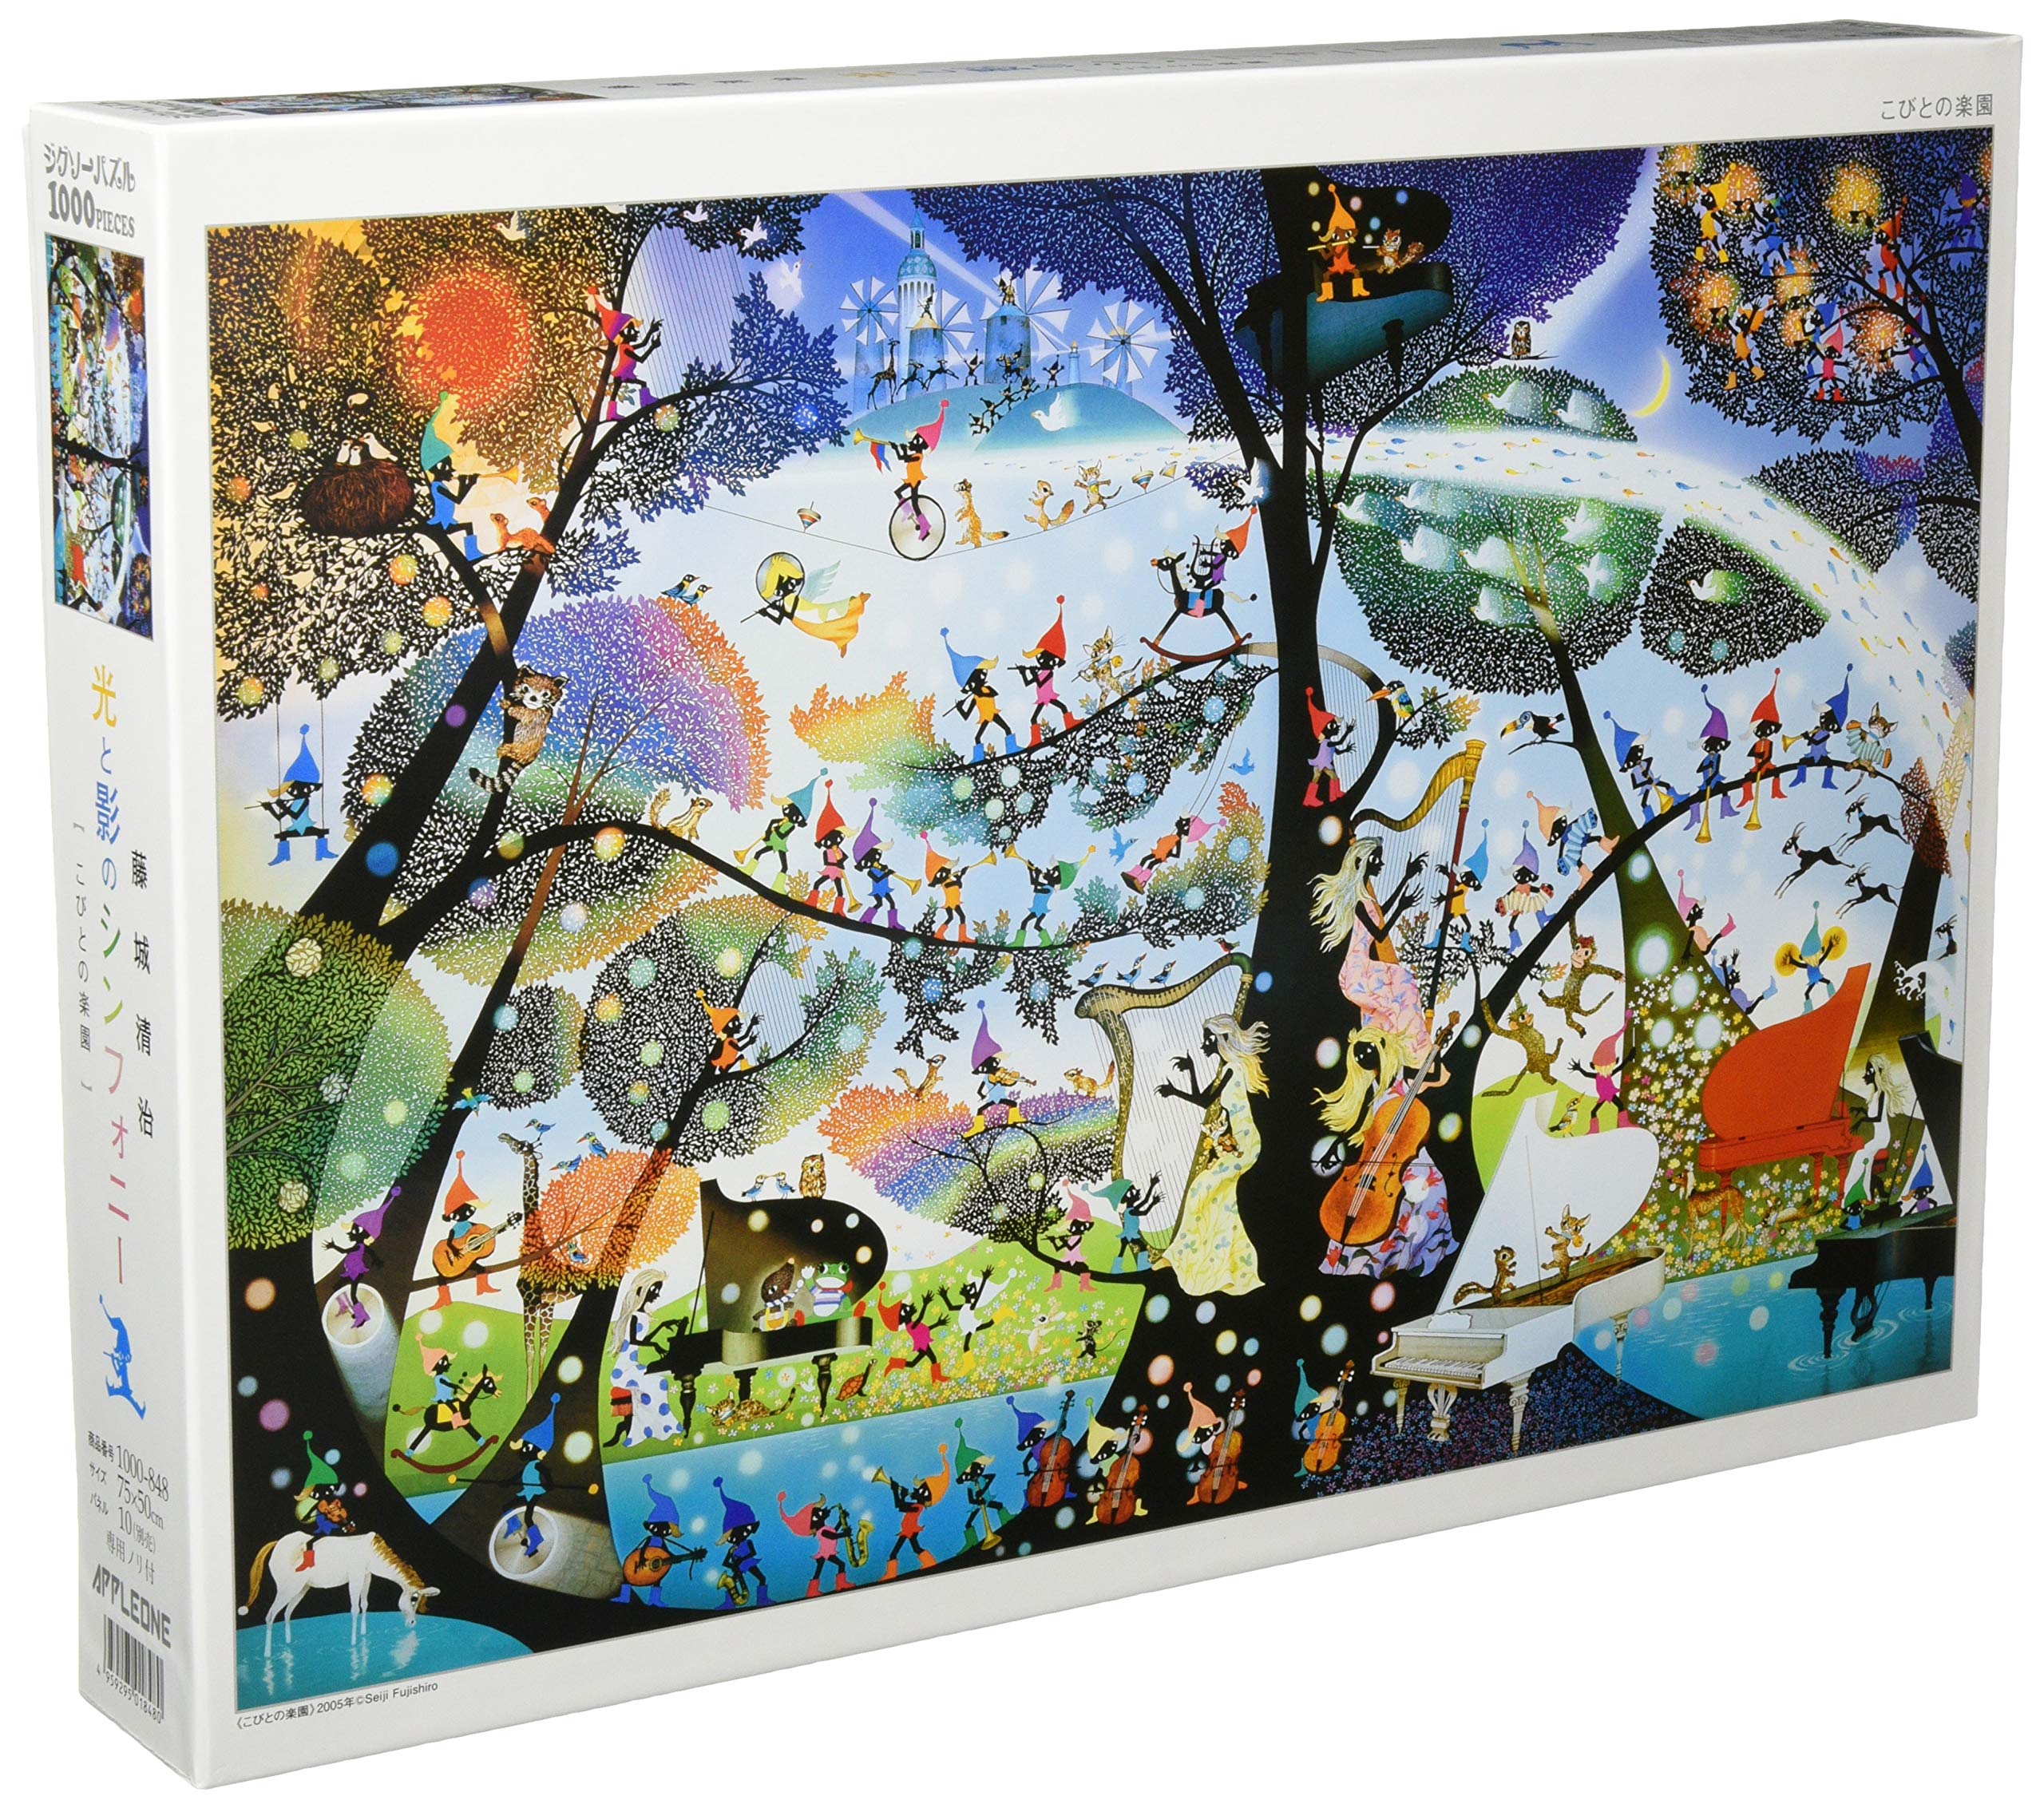 Ensky 1000 Pieces Jigsaw Puzzle One Piece Our treasure! 50 x 75 cm from  Japan